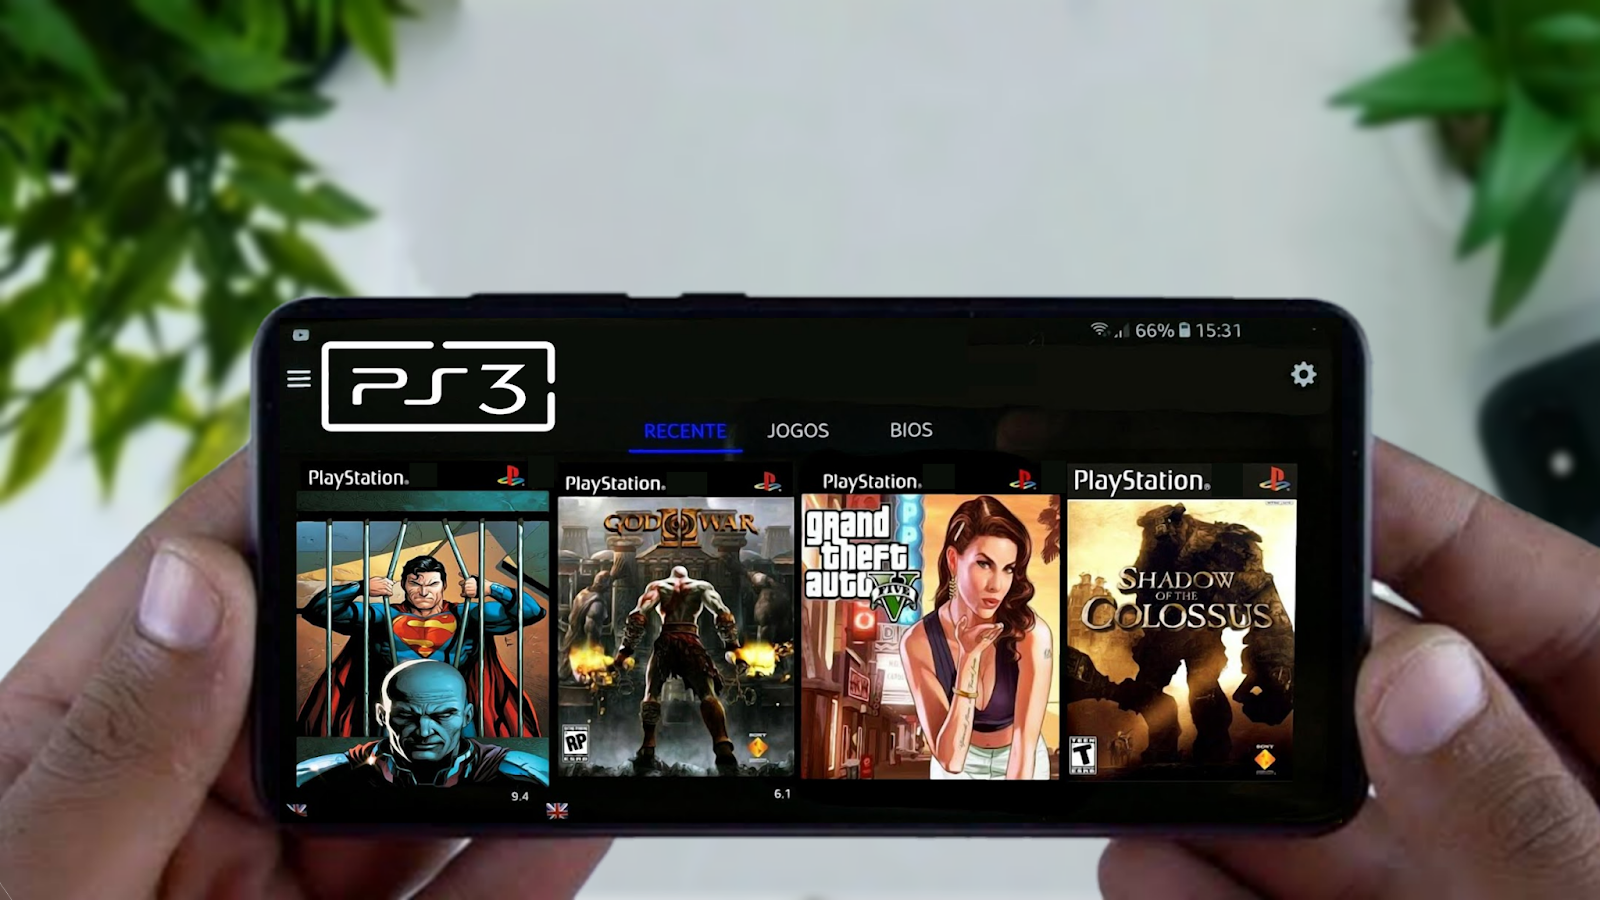 Ps3 Android. Эмулятор PS. Эмулятор пс4 на андроид. Ps3 Emulator for Android.